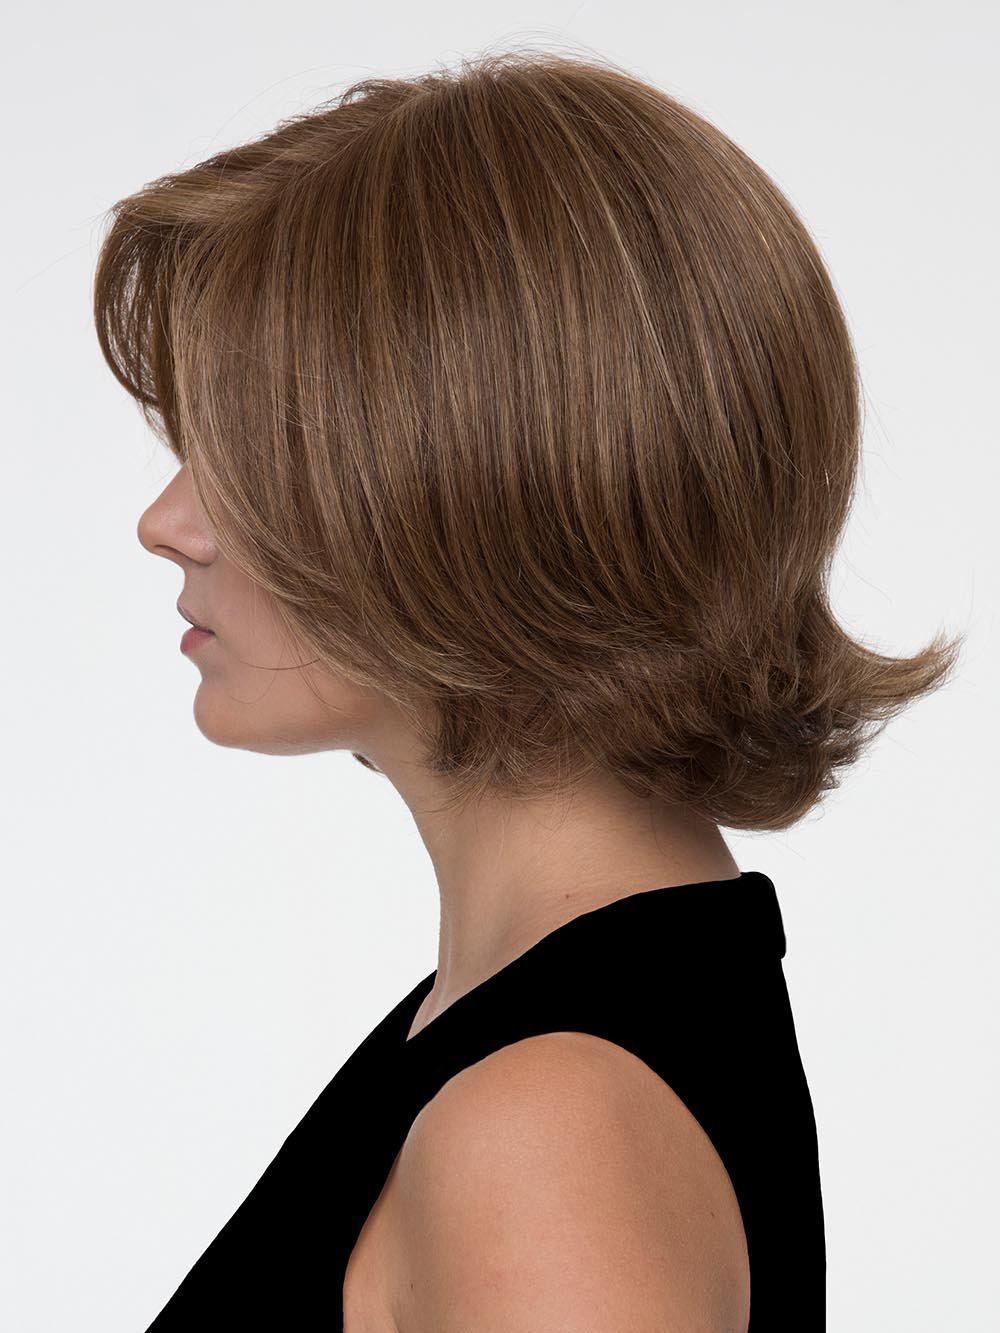 Made with our exclusive Envyhair heat-friendly fiber blend and constructed from a Mono Top with wefted sides and back